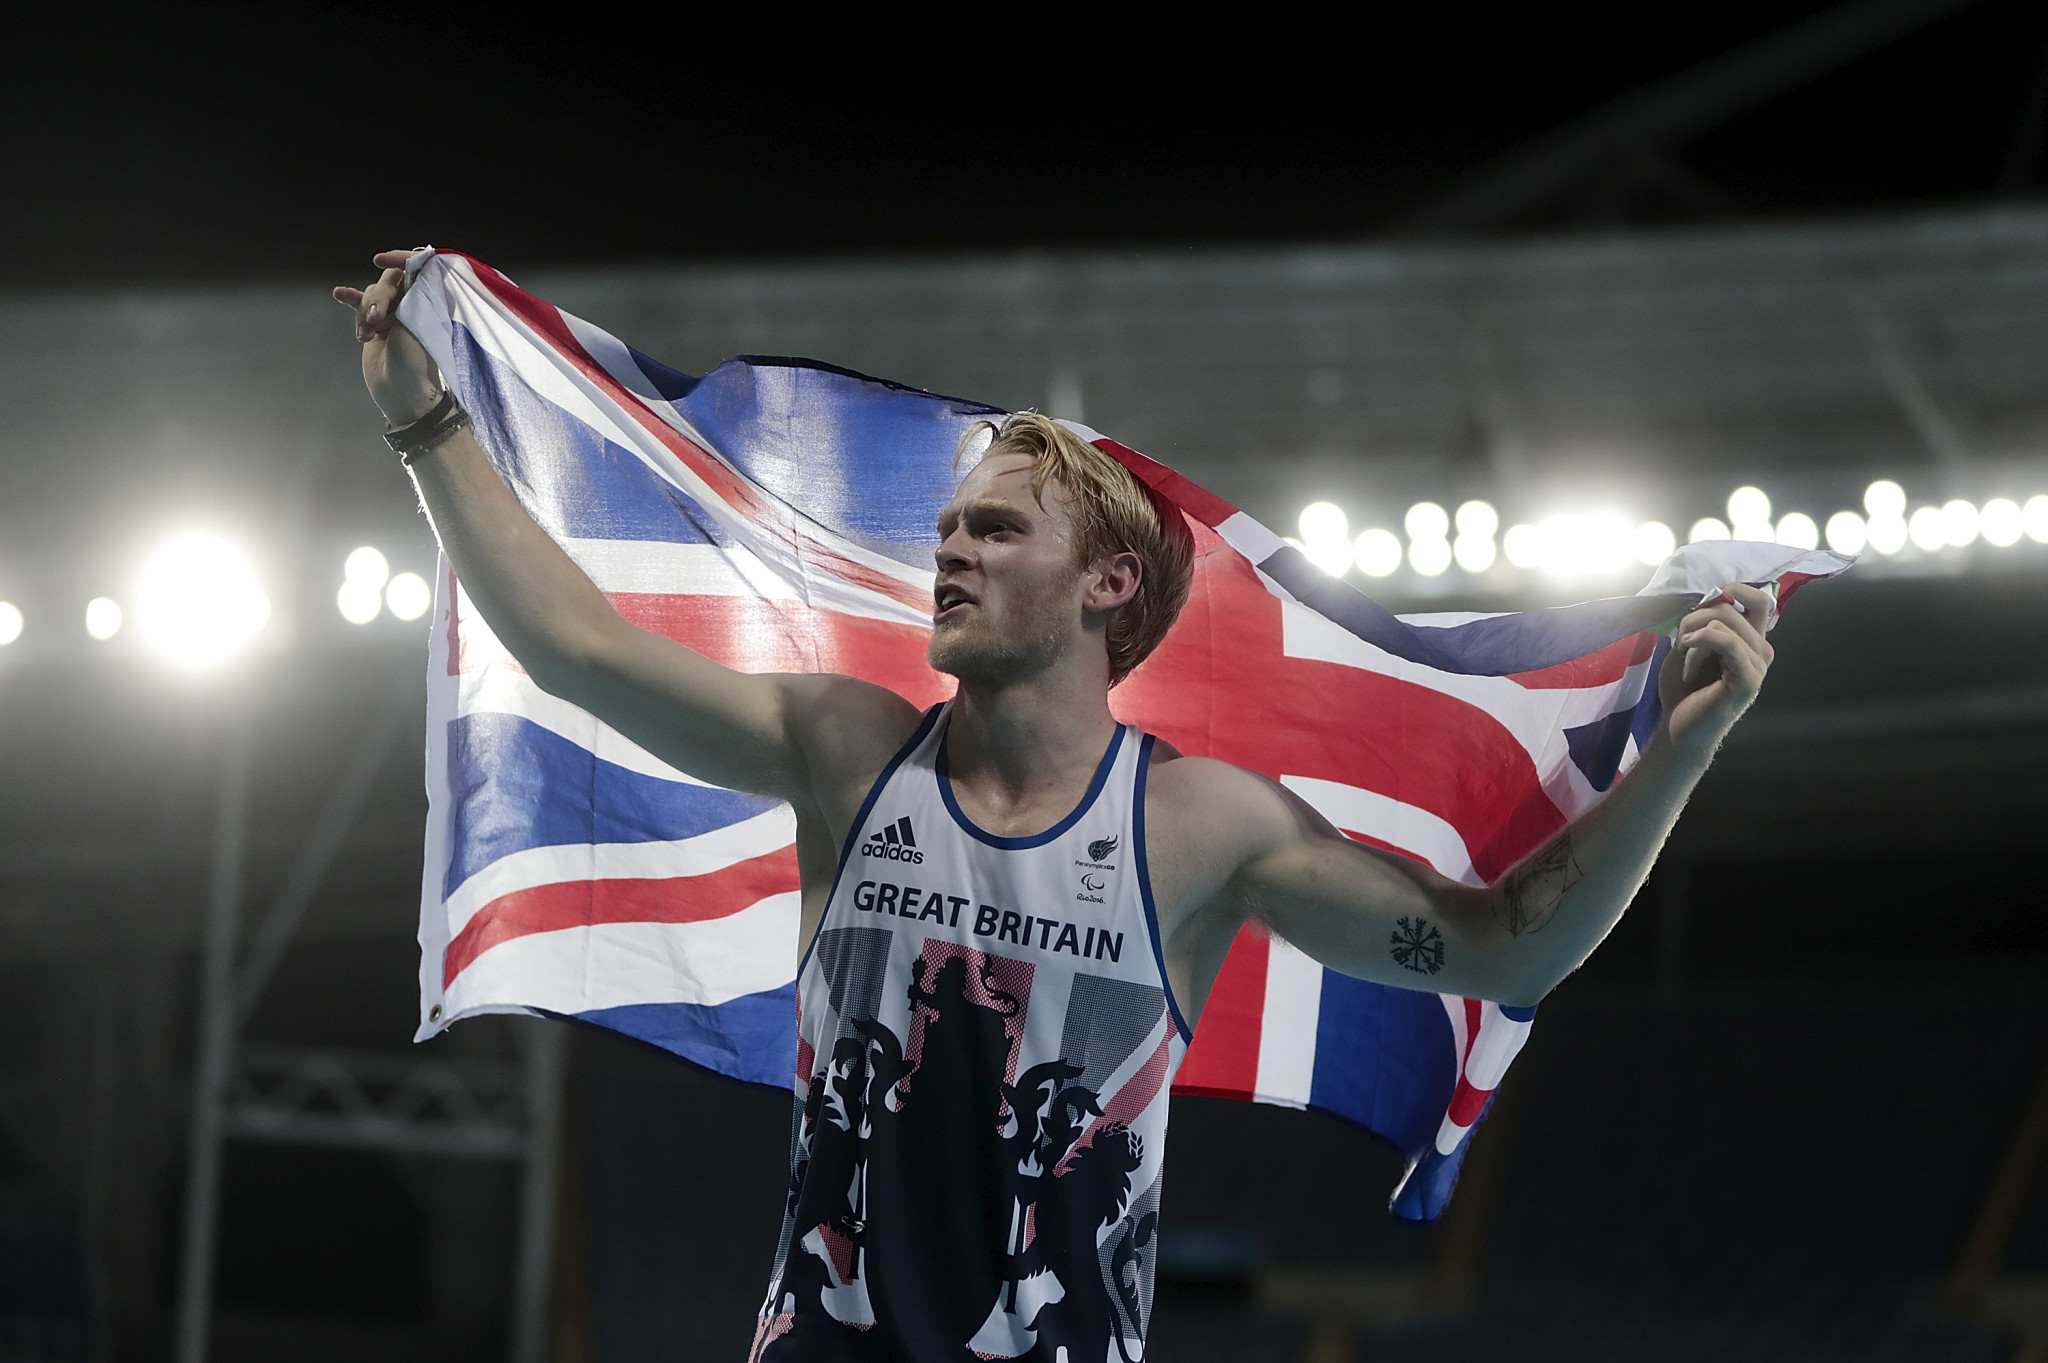 Jonnie Peacock of Great Britain celebrates after winning the Men's 100m F44 Final during day 2 of the Rio 2016 Paralympic Games at the Olympic Stadium ©Getty Images